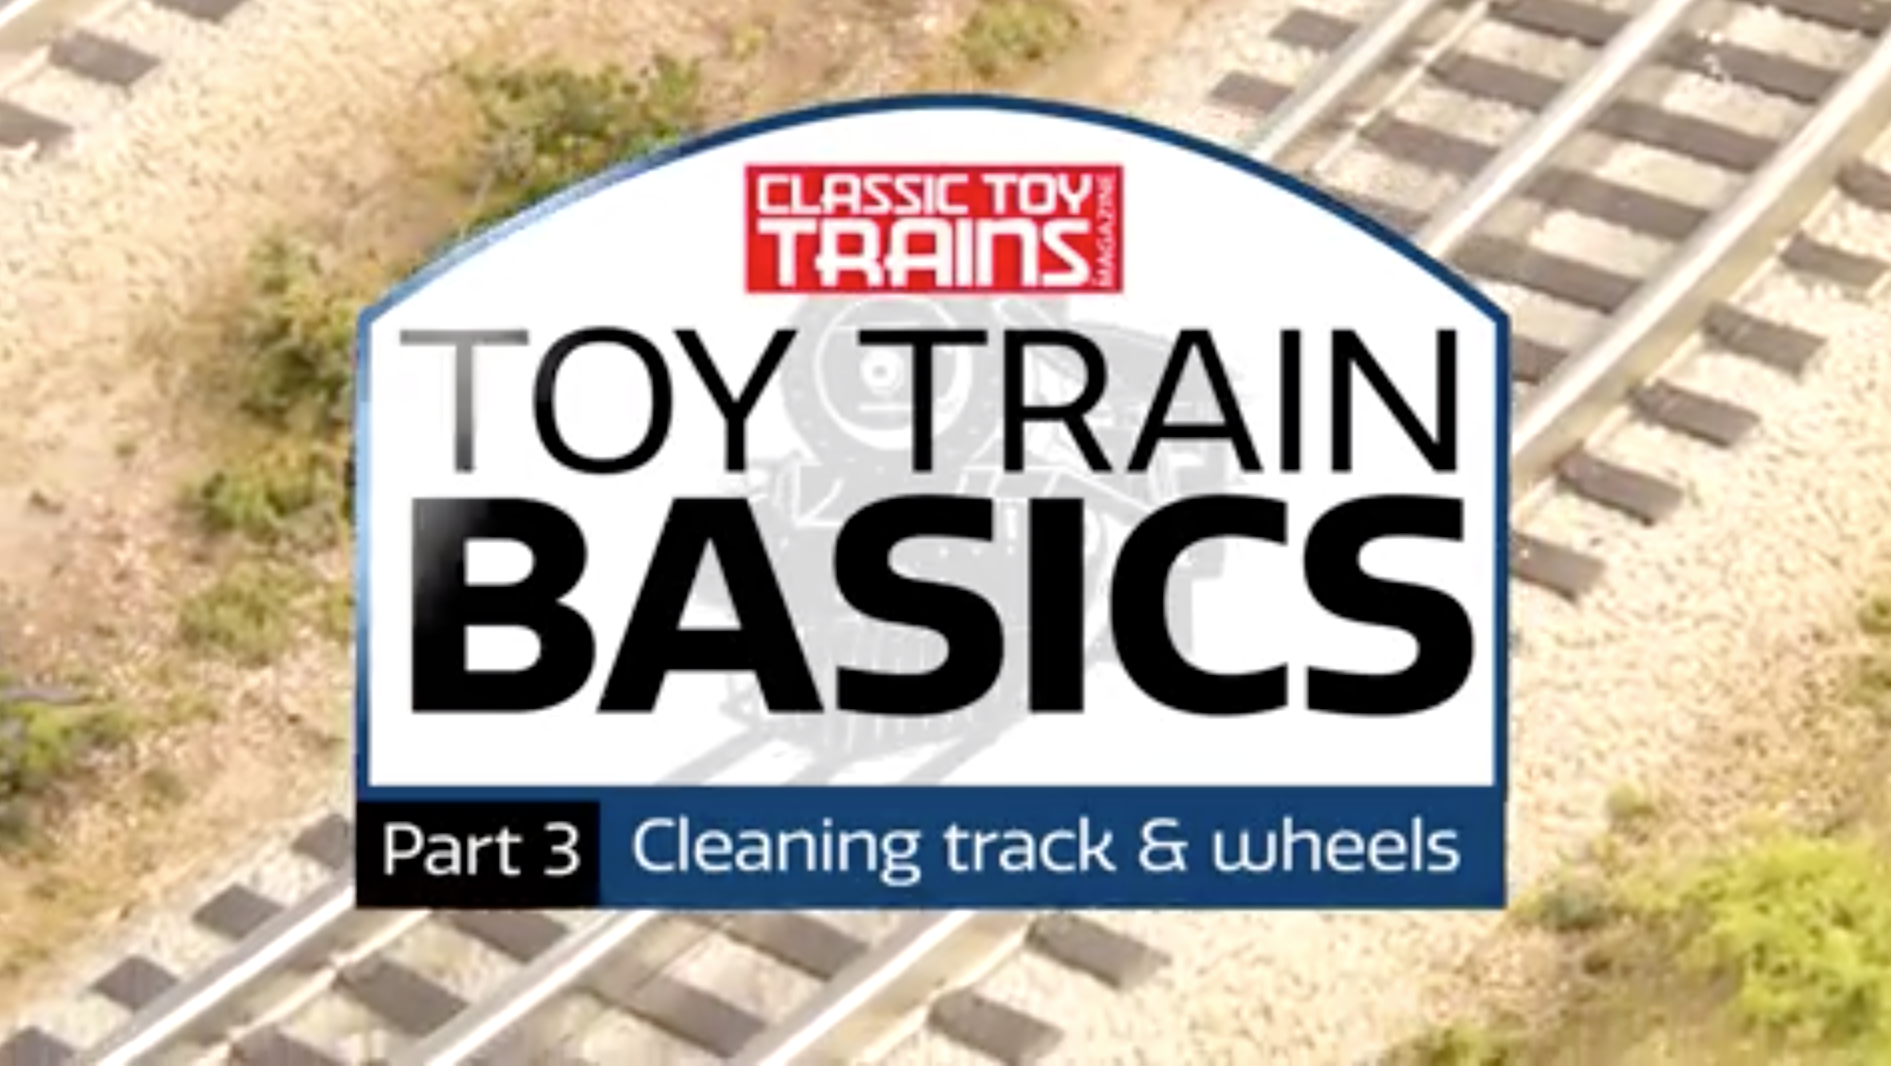 Toy Train Basics: Cleaning track and wheels